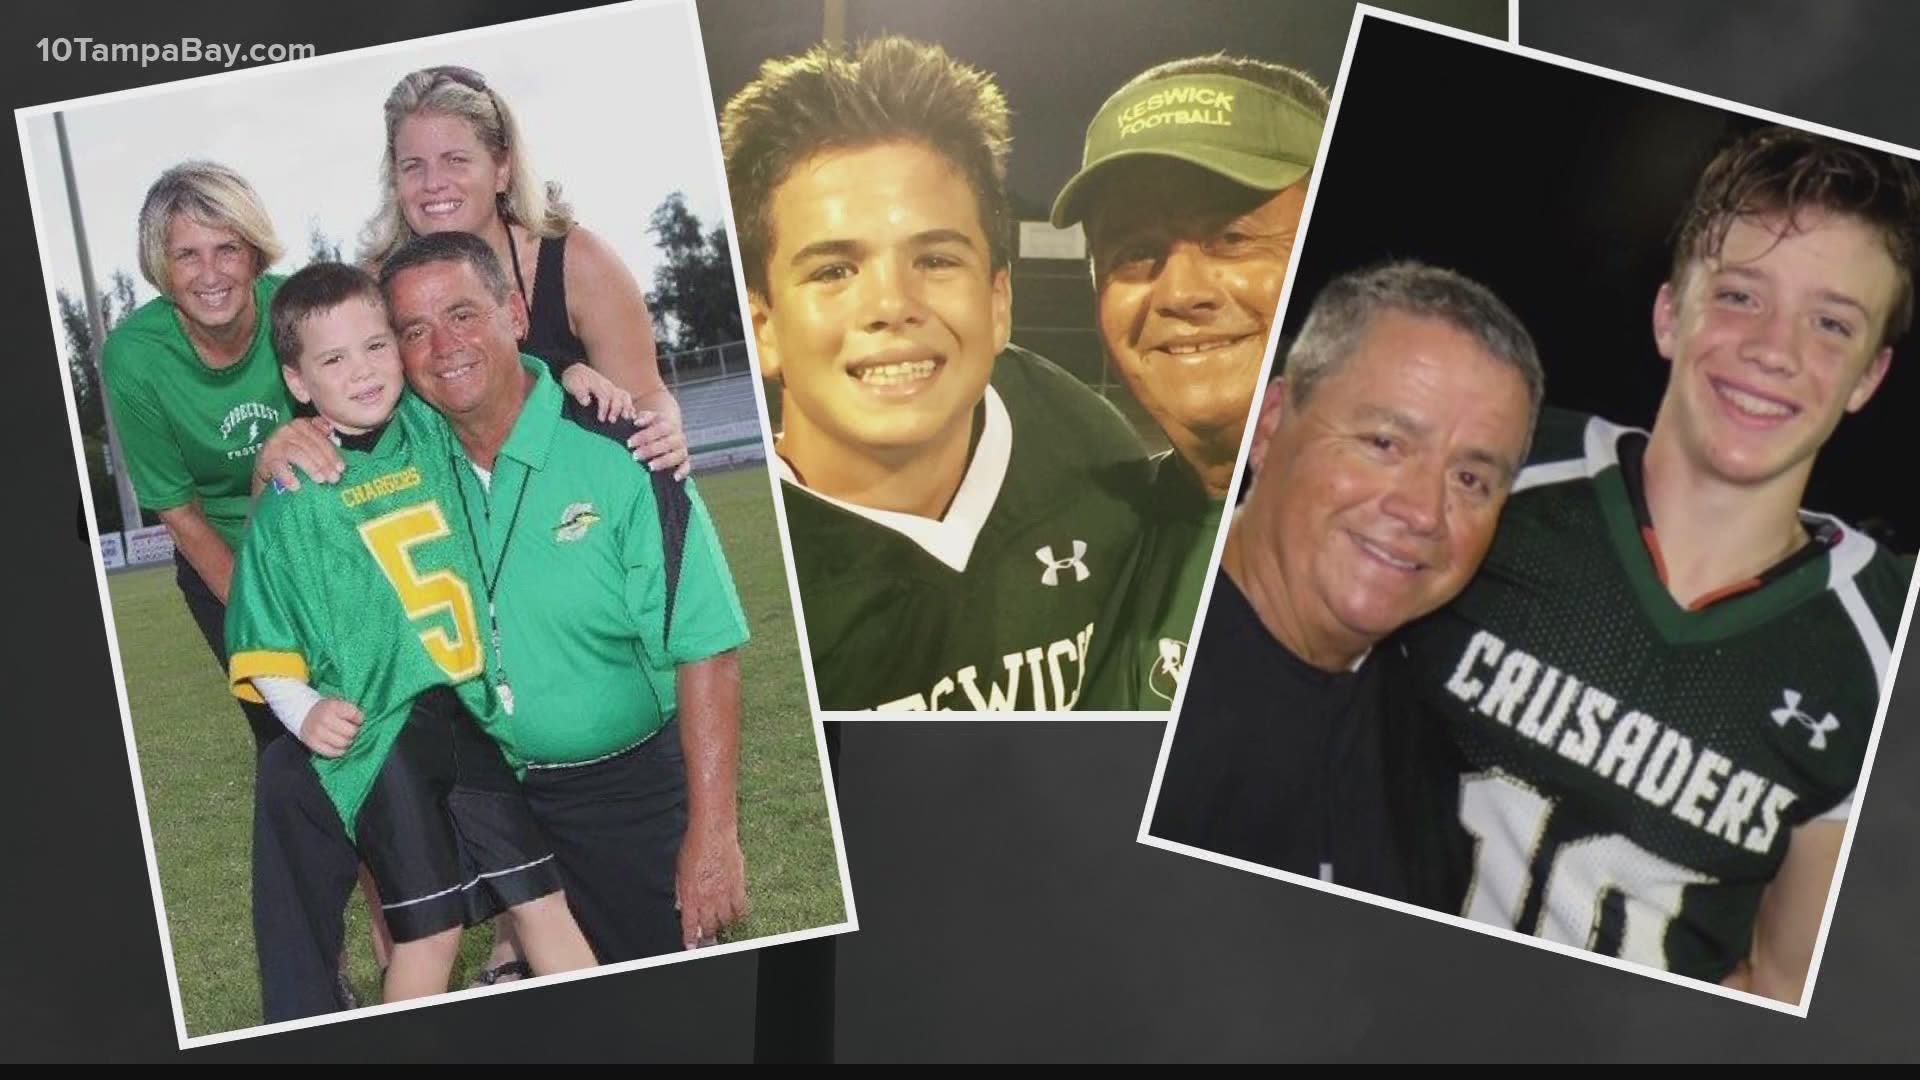 Phil Hayford started coaching at 21. A half-century later, he's Pinellas County's all-time wins leader and kicks off Year 50 in September, alongside his grandson.